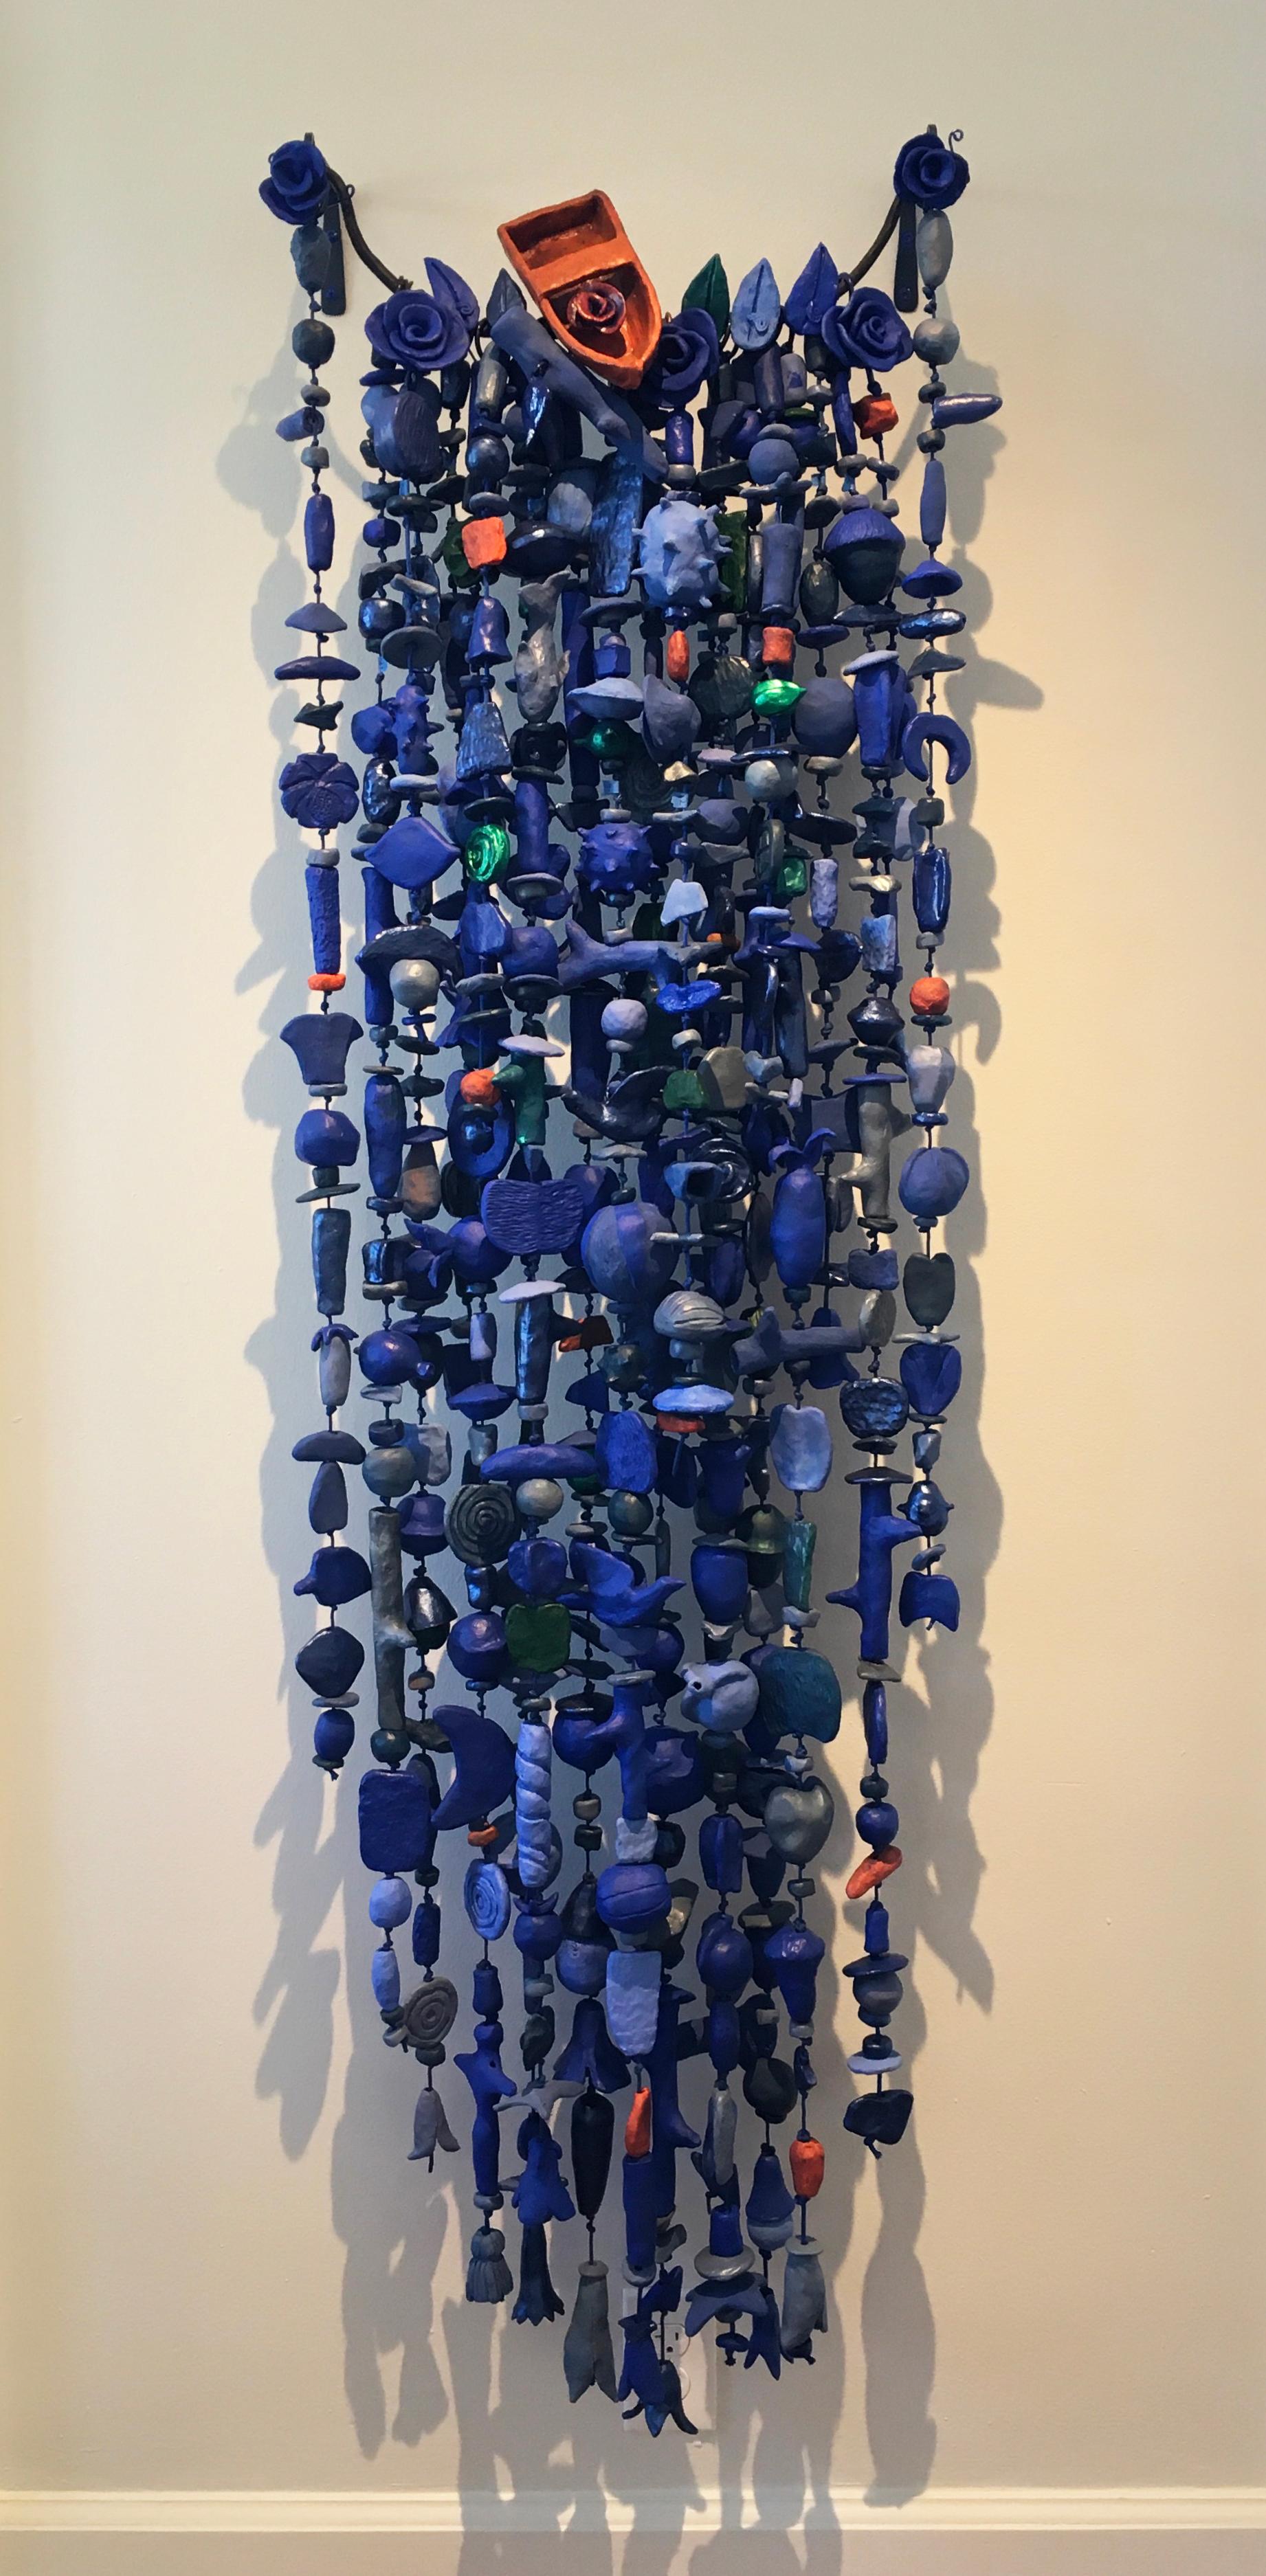 'Waterfall,' by Paul Medina is a ceramic and mixed media suspended sculpture, measuring 60 x 28 x 9 inches, and comprises strands of low-fired clay elements, connected by nylon cord hanging from a steel rod and brackets.
The majority of clay forms